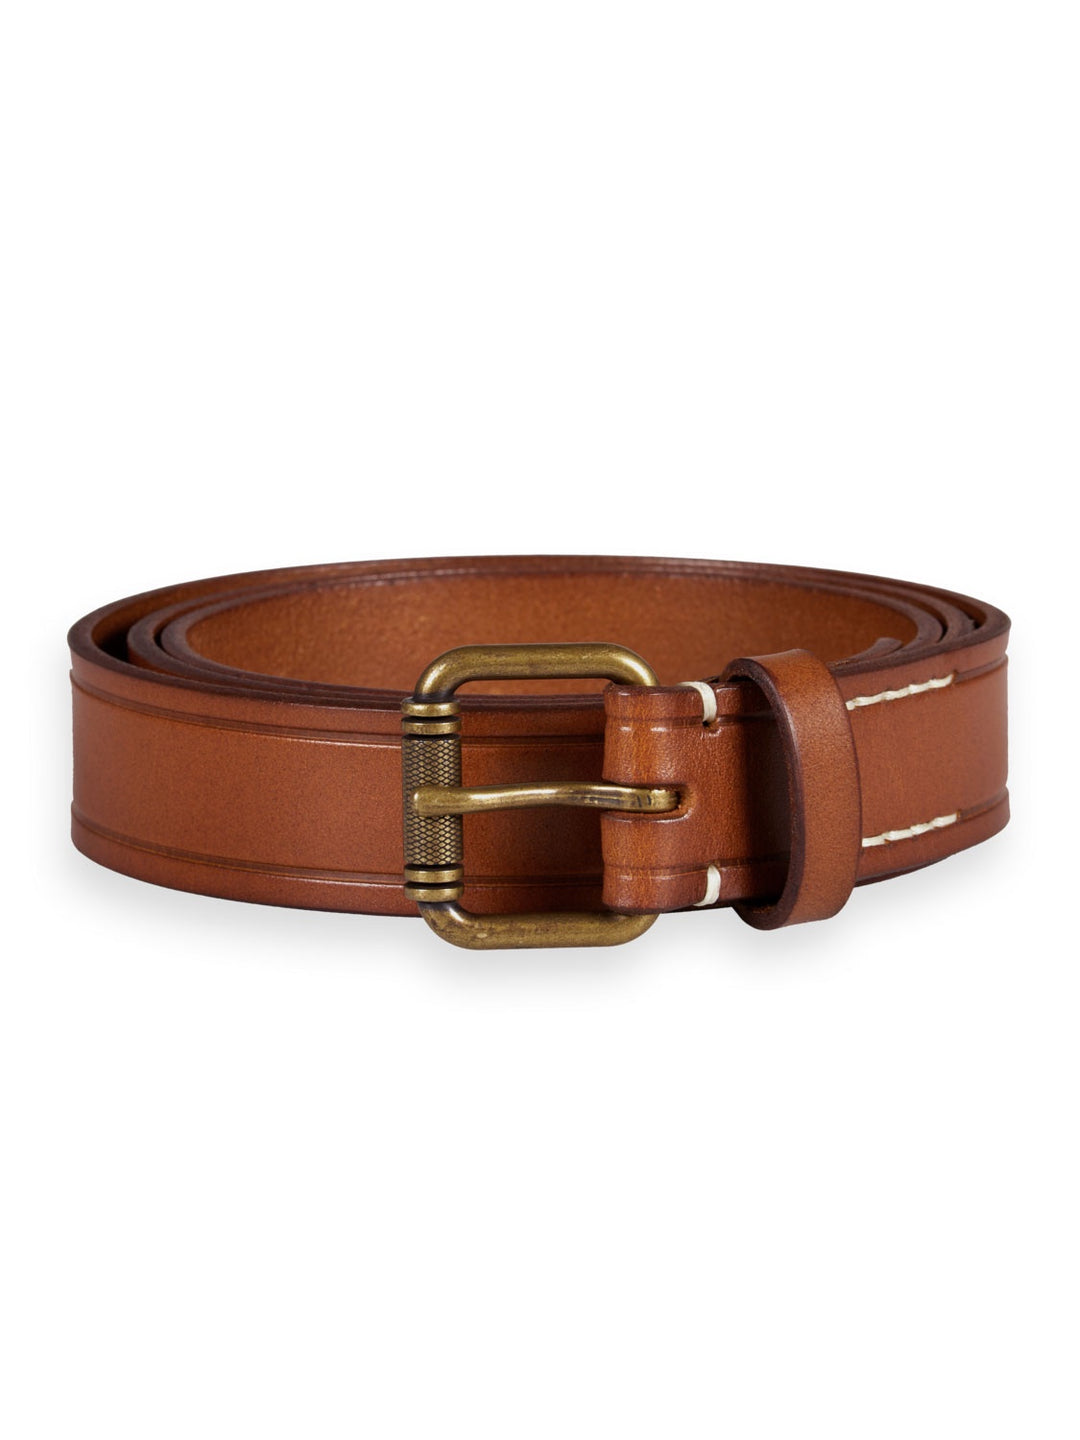  Scotch & Soda - Raw Edge Leather Belt in Deep Toffee | Buster McGee